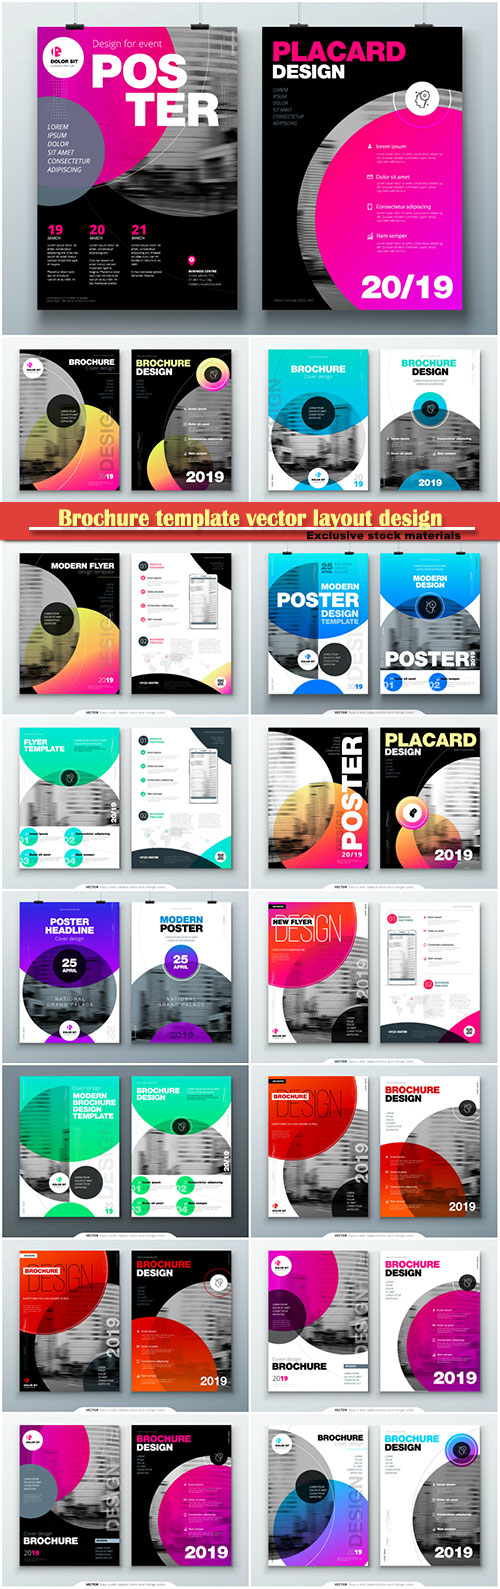 Brochure template vector layout design, corporate business annual report, magazine, flyer mockup # 150